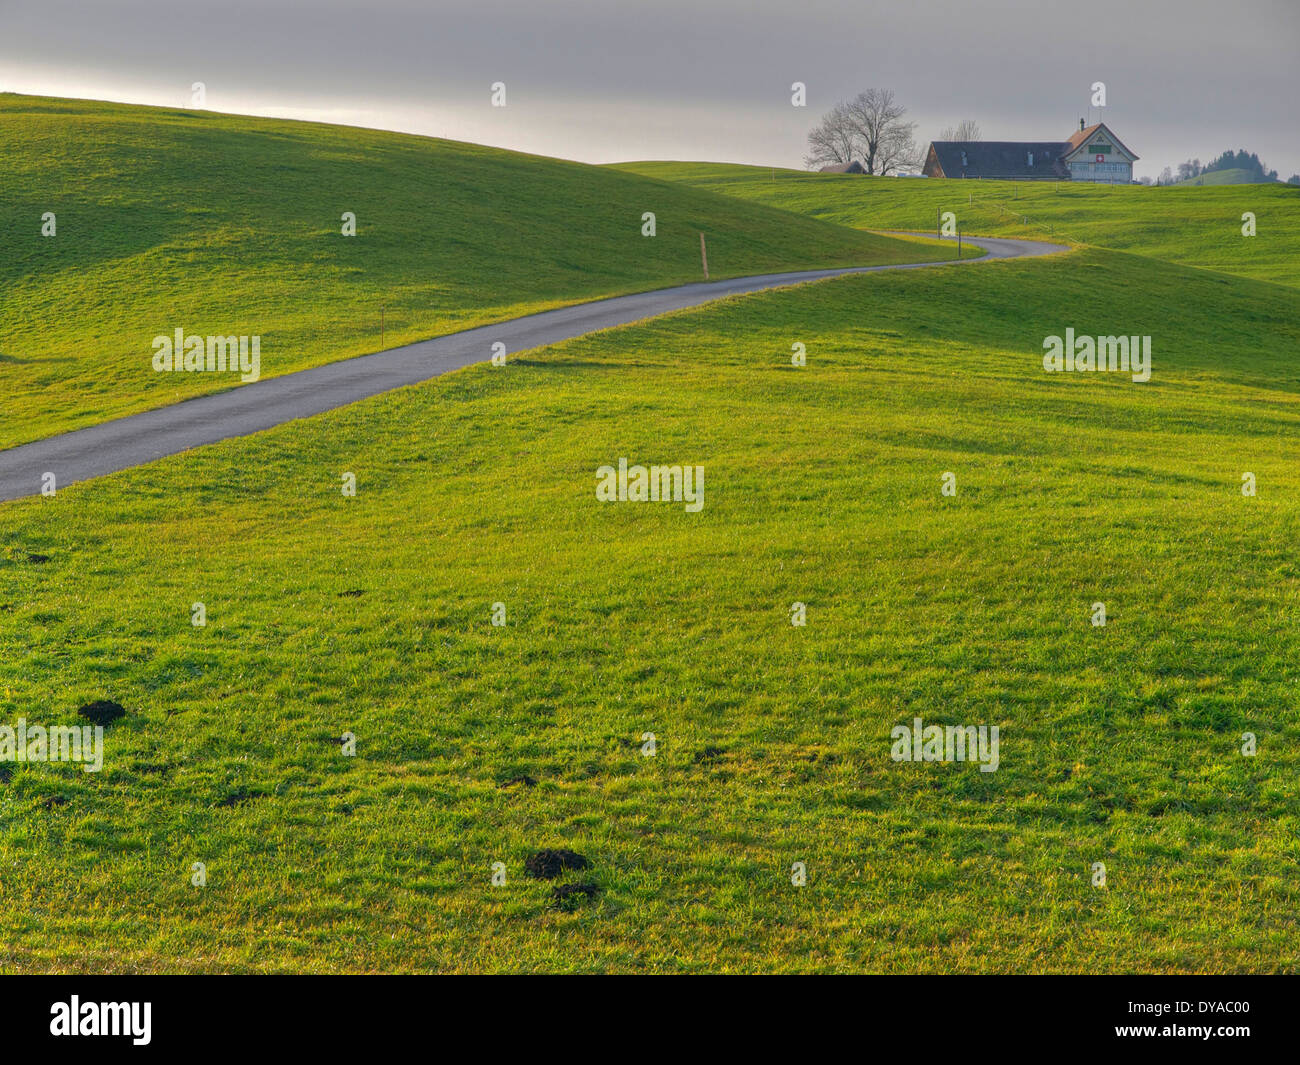 Appenzell, Switzerland, Europe, farm, country lane, gonten, autumn, scenery, landscape, meadows, agriculture Stock Photo